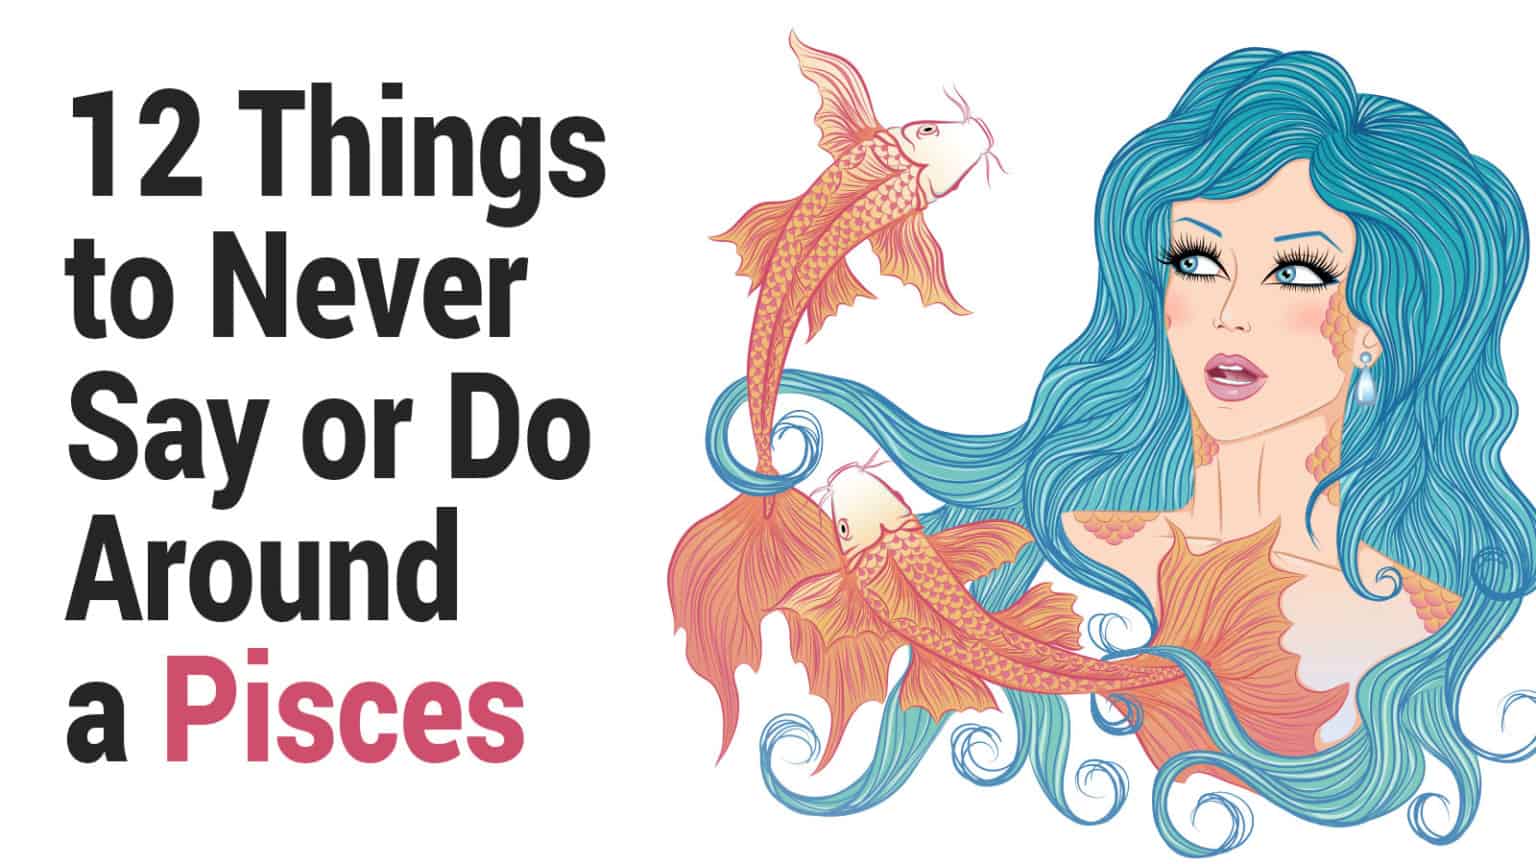 12 Things to Never Say or Do Around a Pisces.